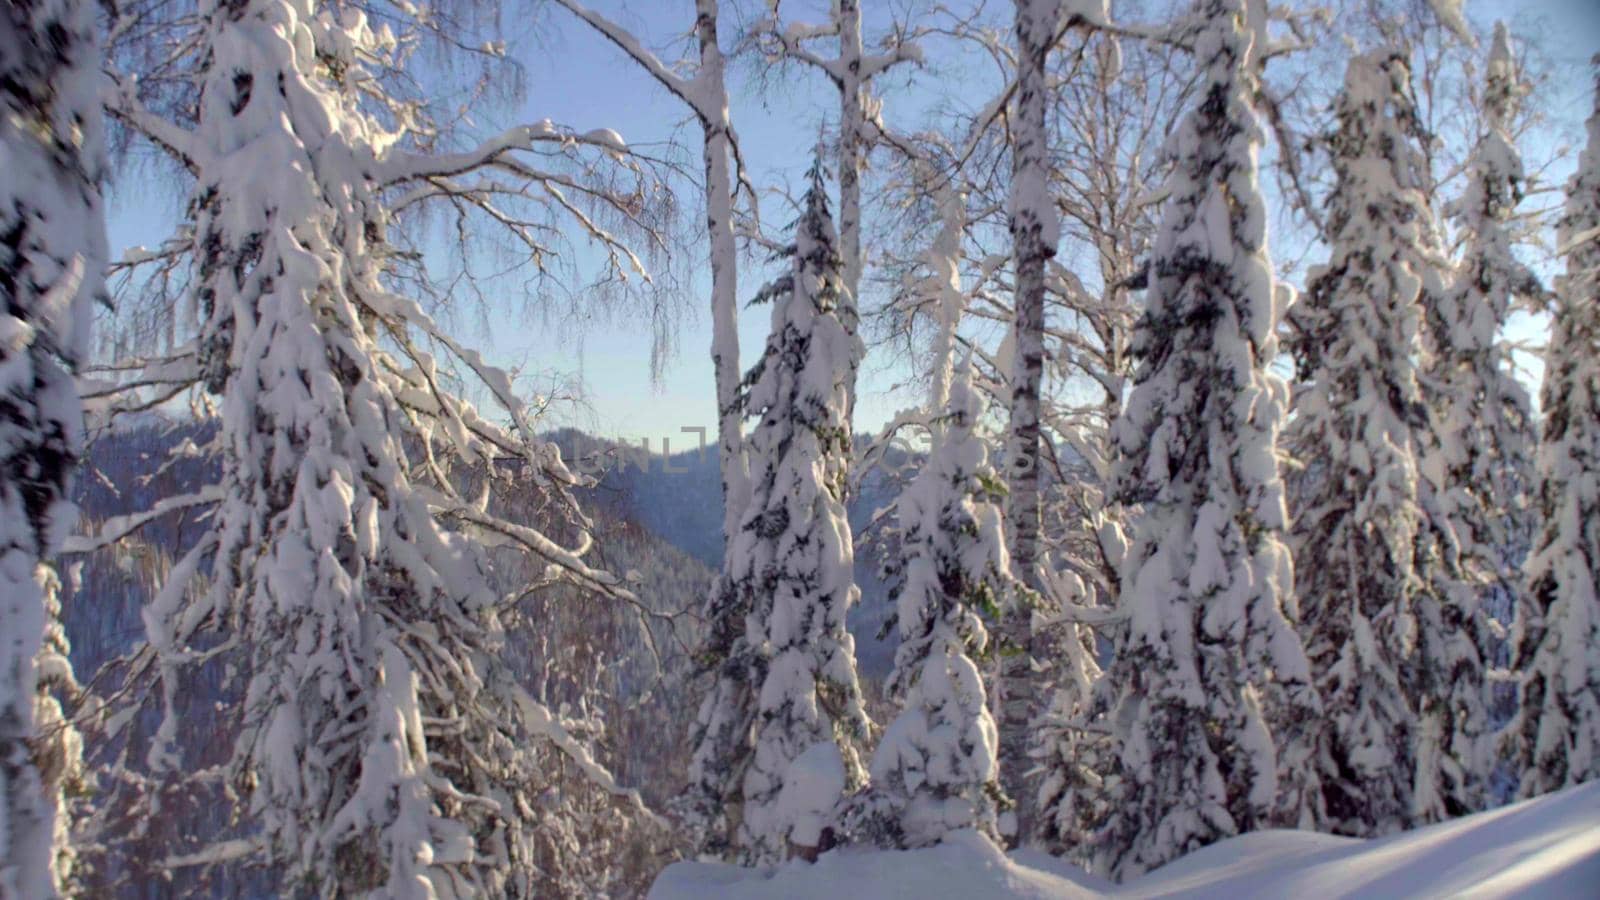 View of the winter forest in the Siberian mountains by Chudakov